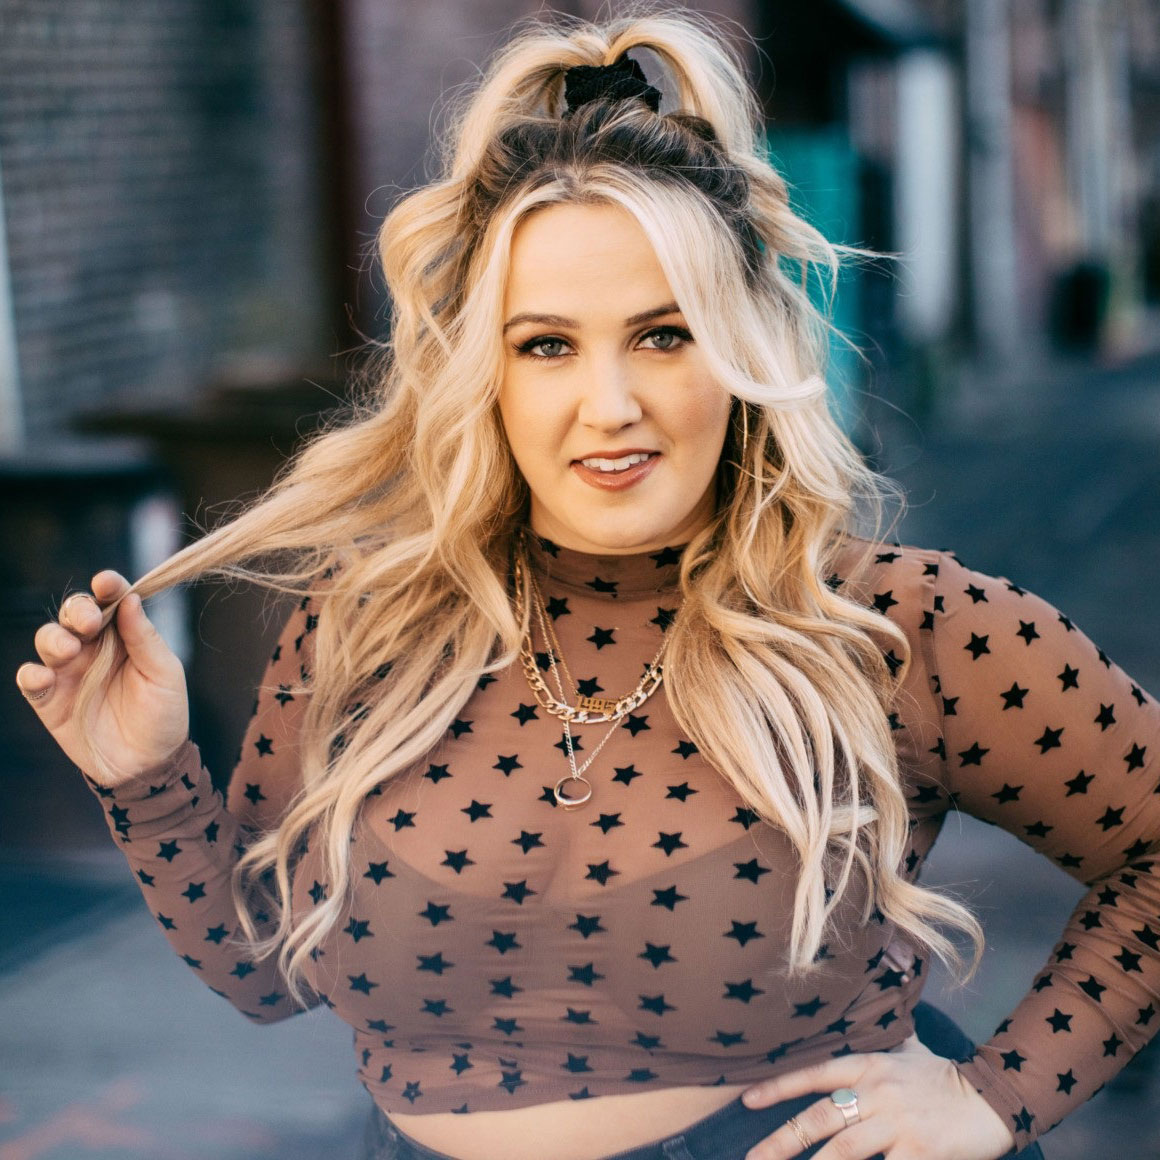 BREAKOUT COUNTRY MUSIC STAR PRISCILLA BLOCK TAKES HER WELCOME TO THE BLOCK PARTY TOUR OVERSEAS FOR FIRST WORLD TOUR DATES FOLLOWING WILDLY SUCCESSFUL U.S. TOUR DATES.